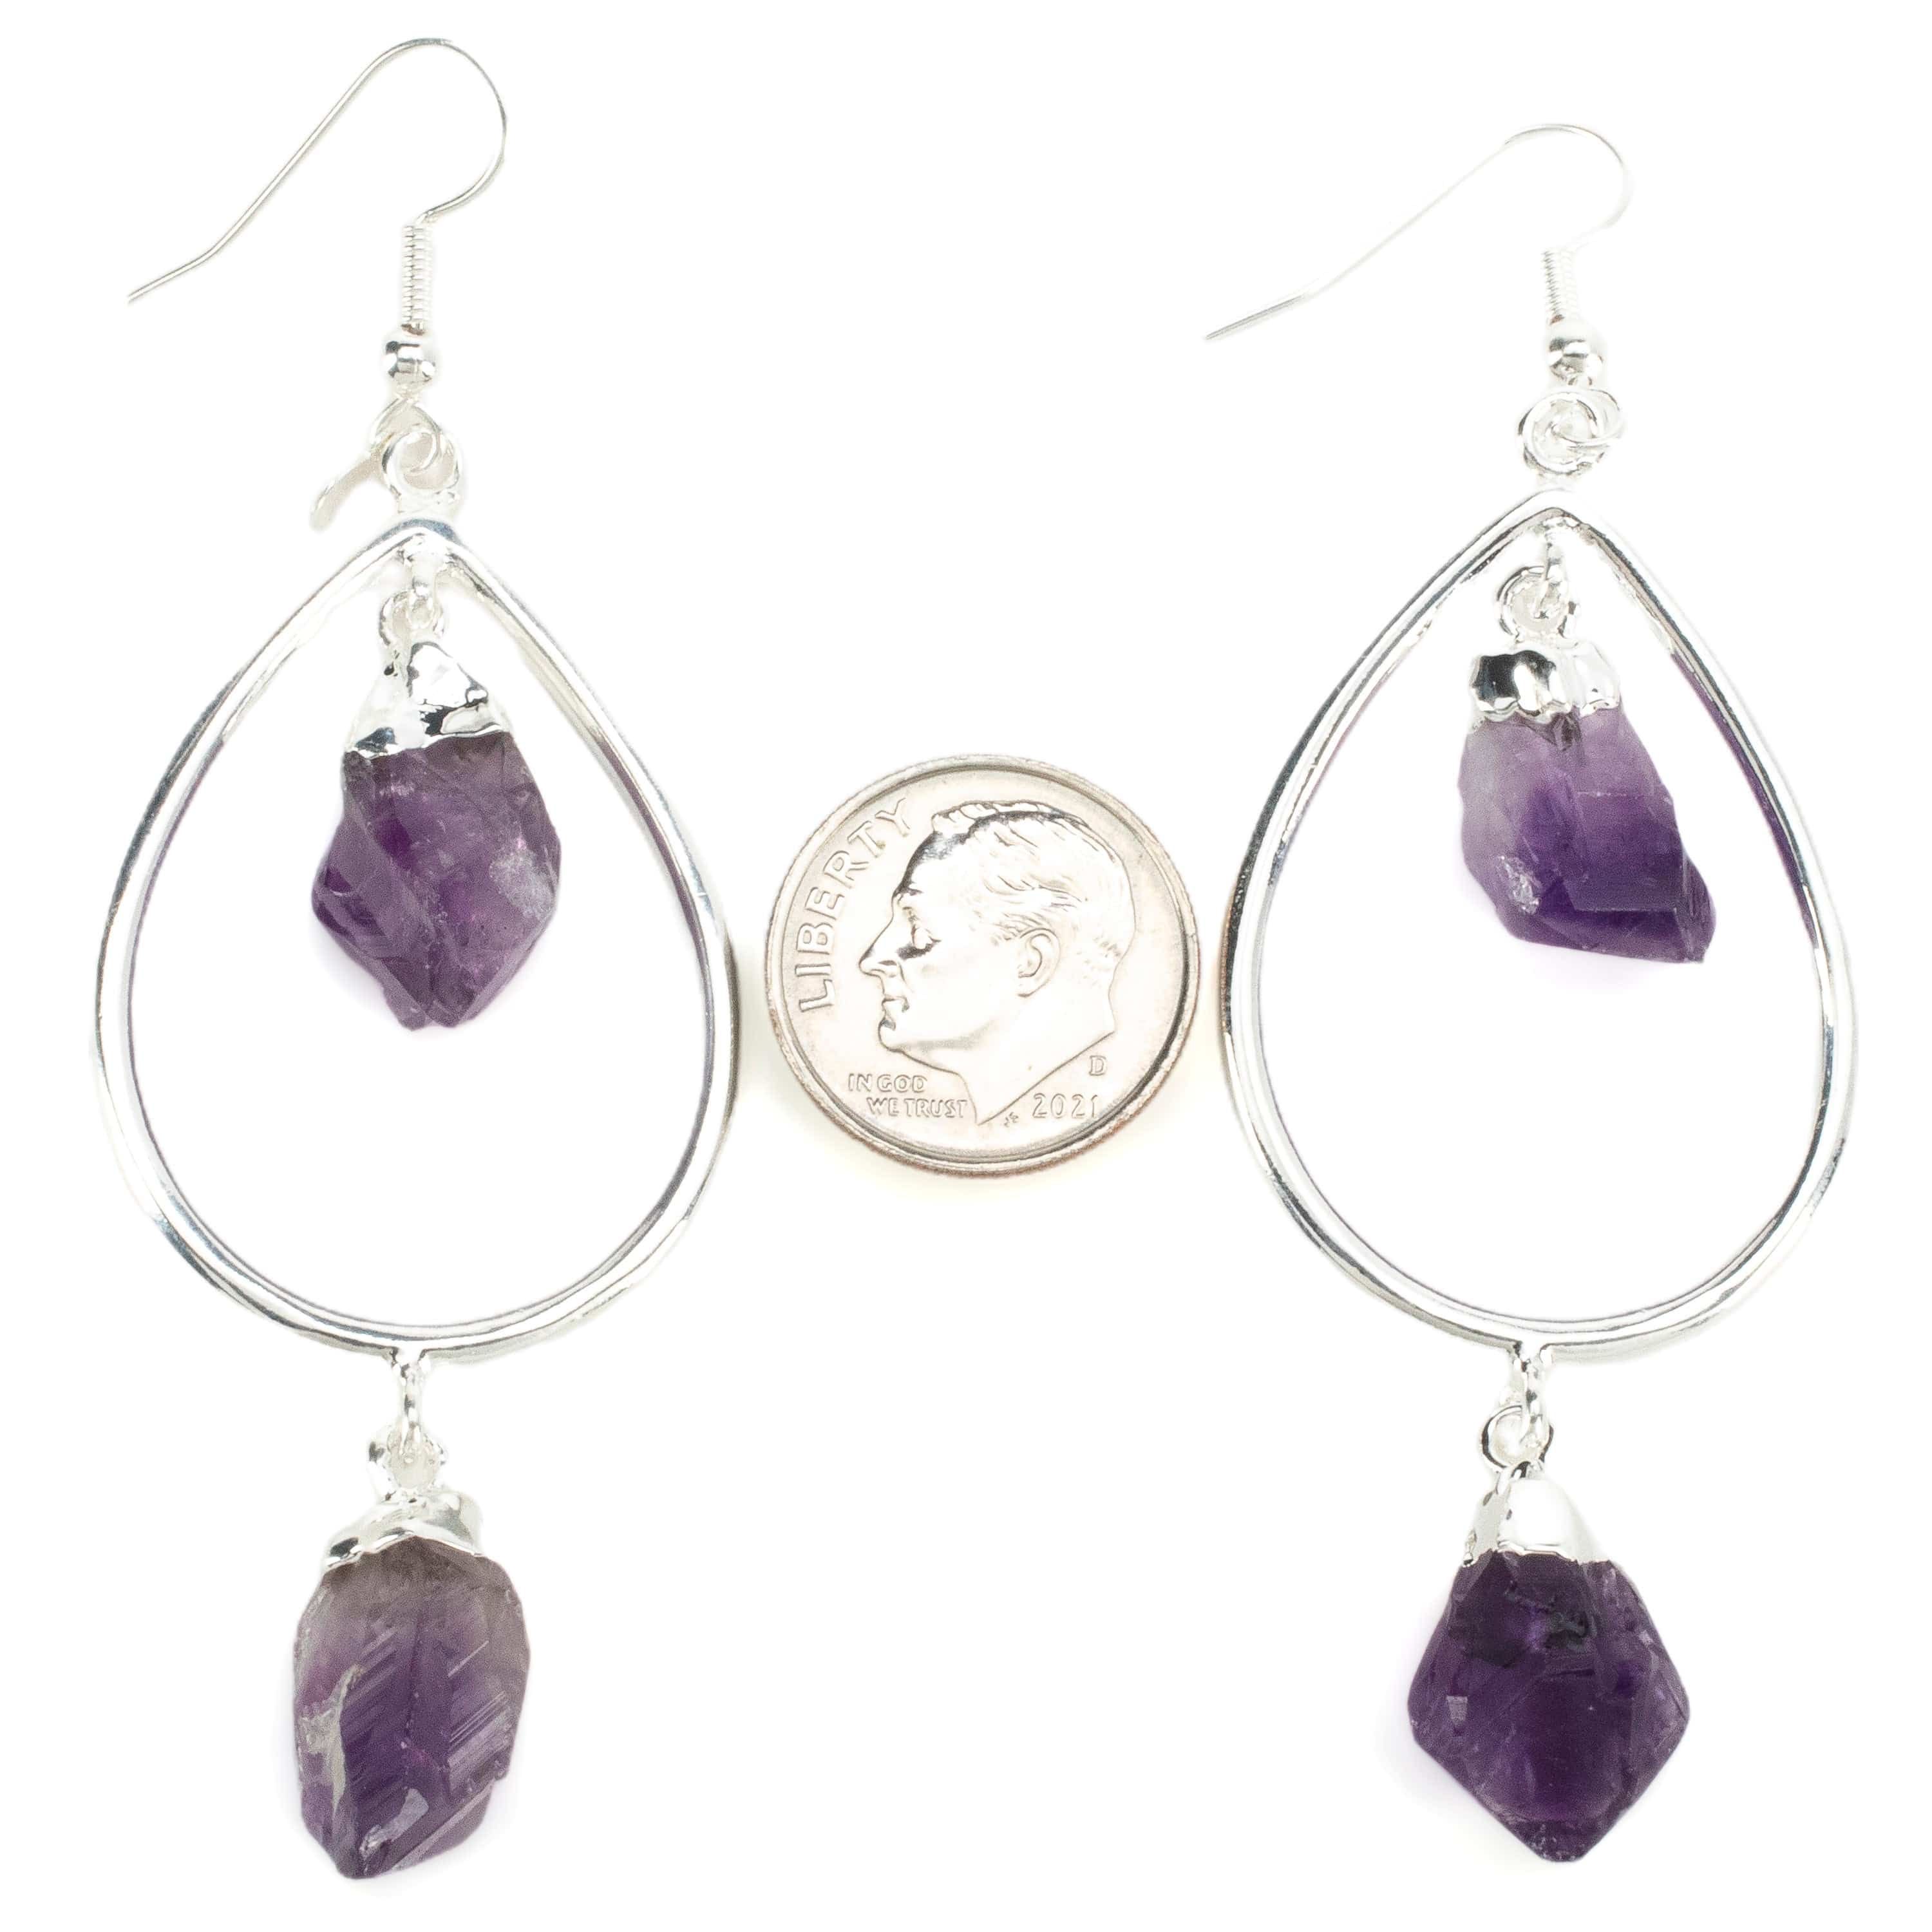 Kalifano Crystal Jewelry Amethyst Crystal Drop Earrings with French Hook CJE-1548-AM